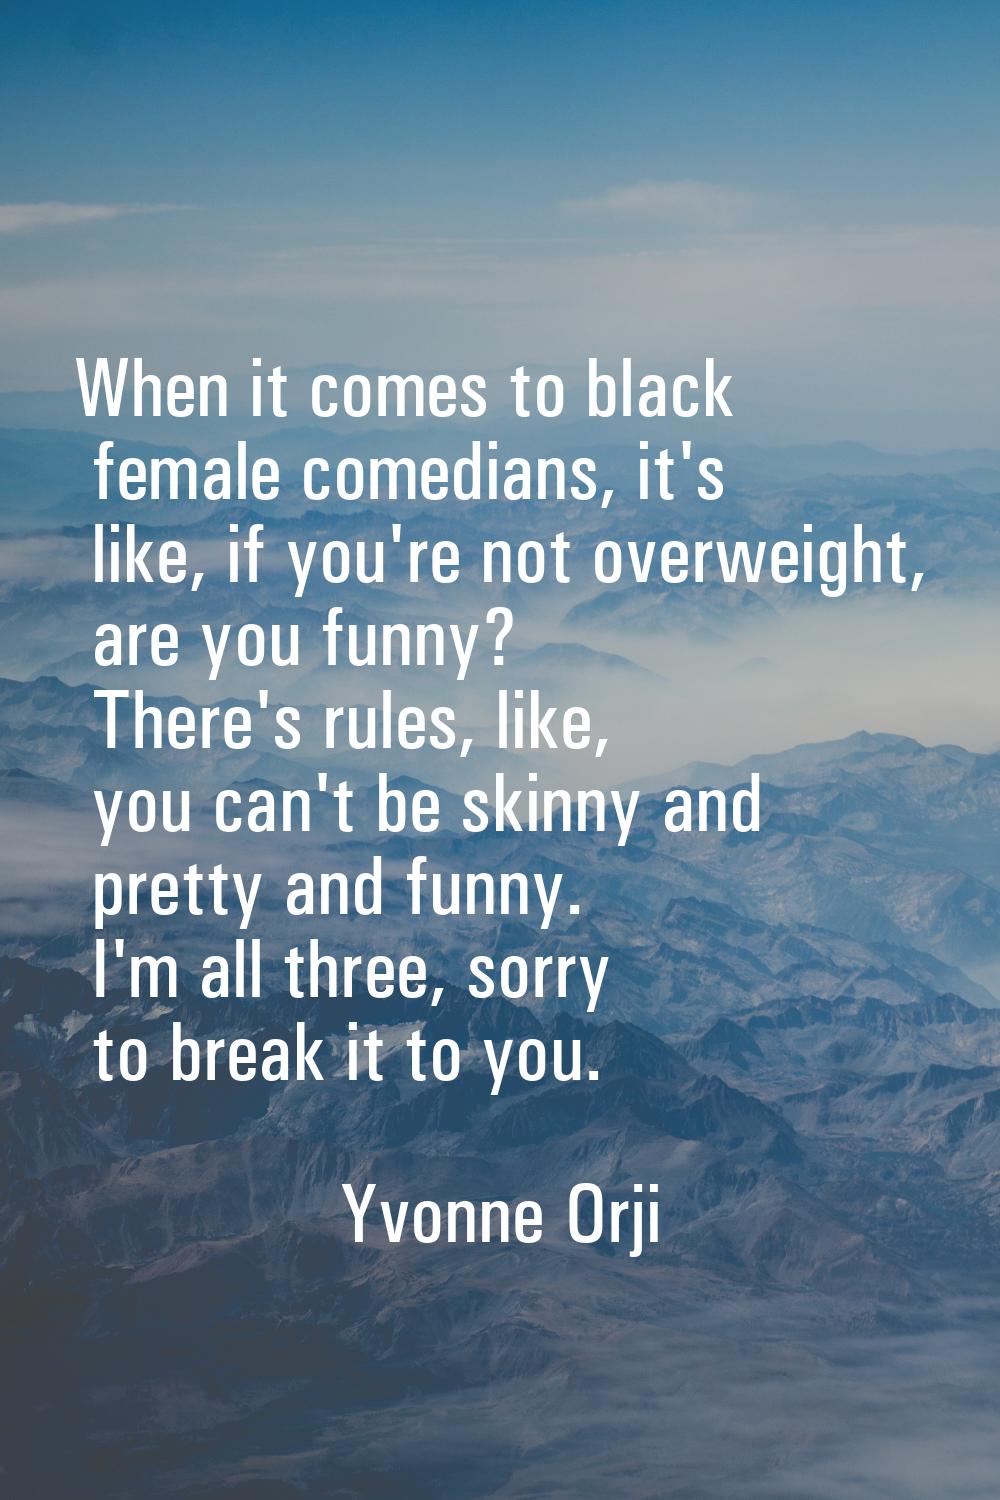 When it comes to black female comedians, it's like, if you're not overweight, are you funny? There'